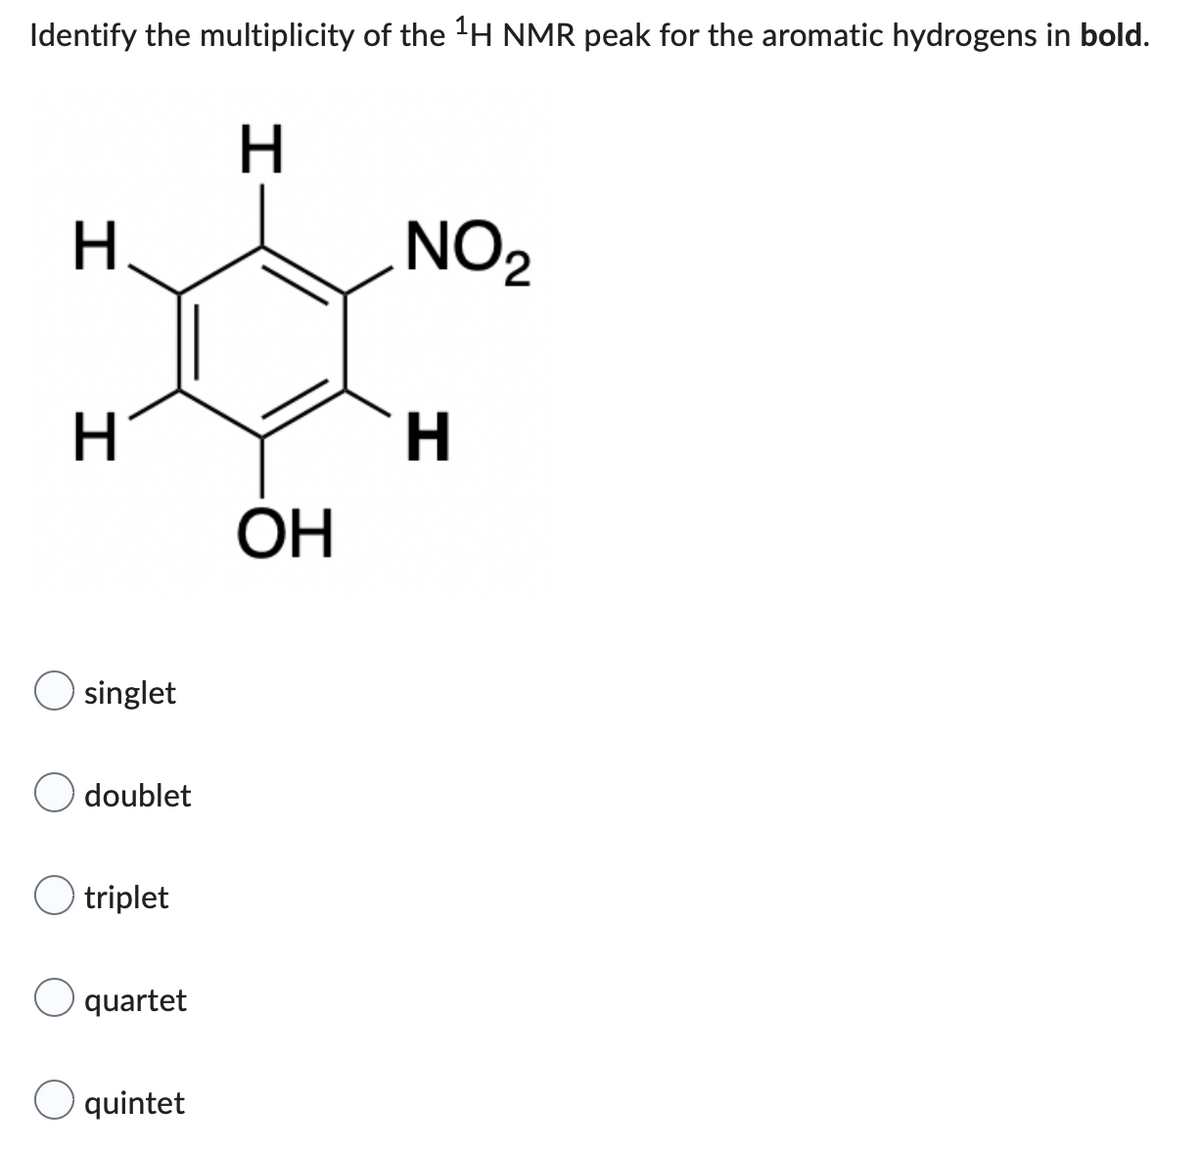 Identify the multiplicity of the ¹H NMR peak for the aromatic hydrogens in bold.
H
H
NO₂
H
H
singlet
O doublet
O triplet
O quartet
O quintet
OH